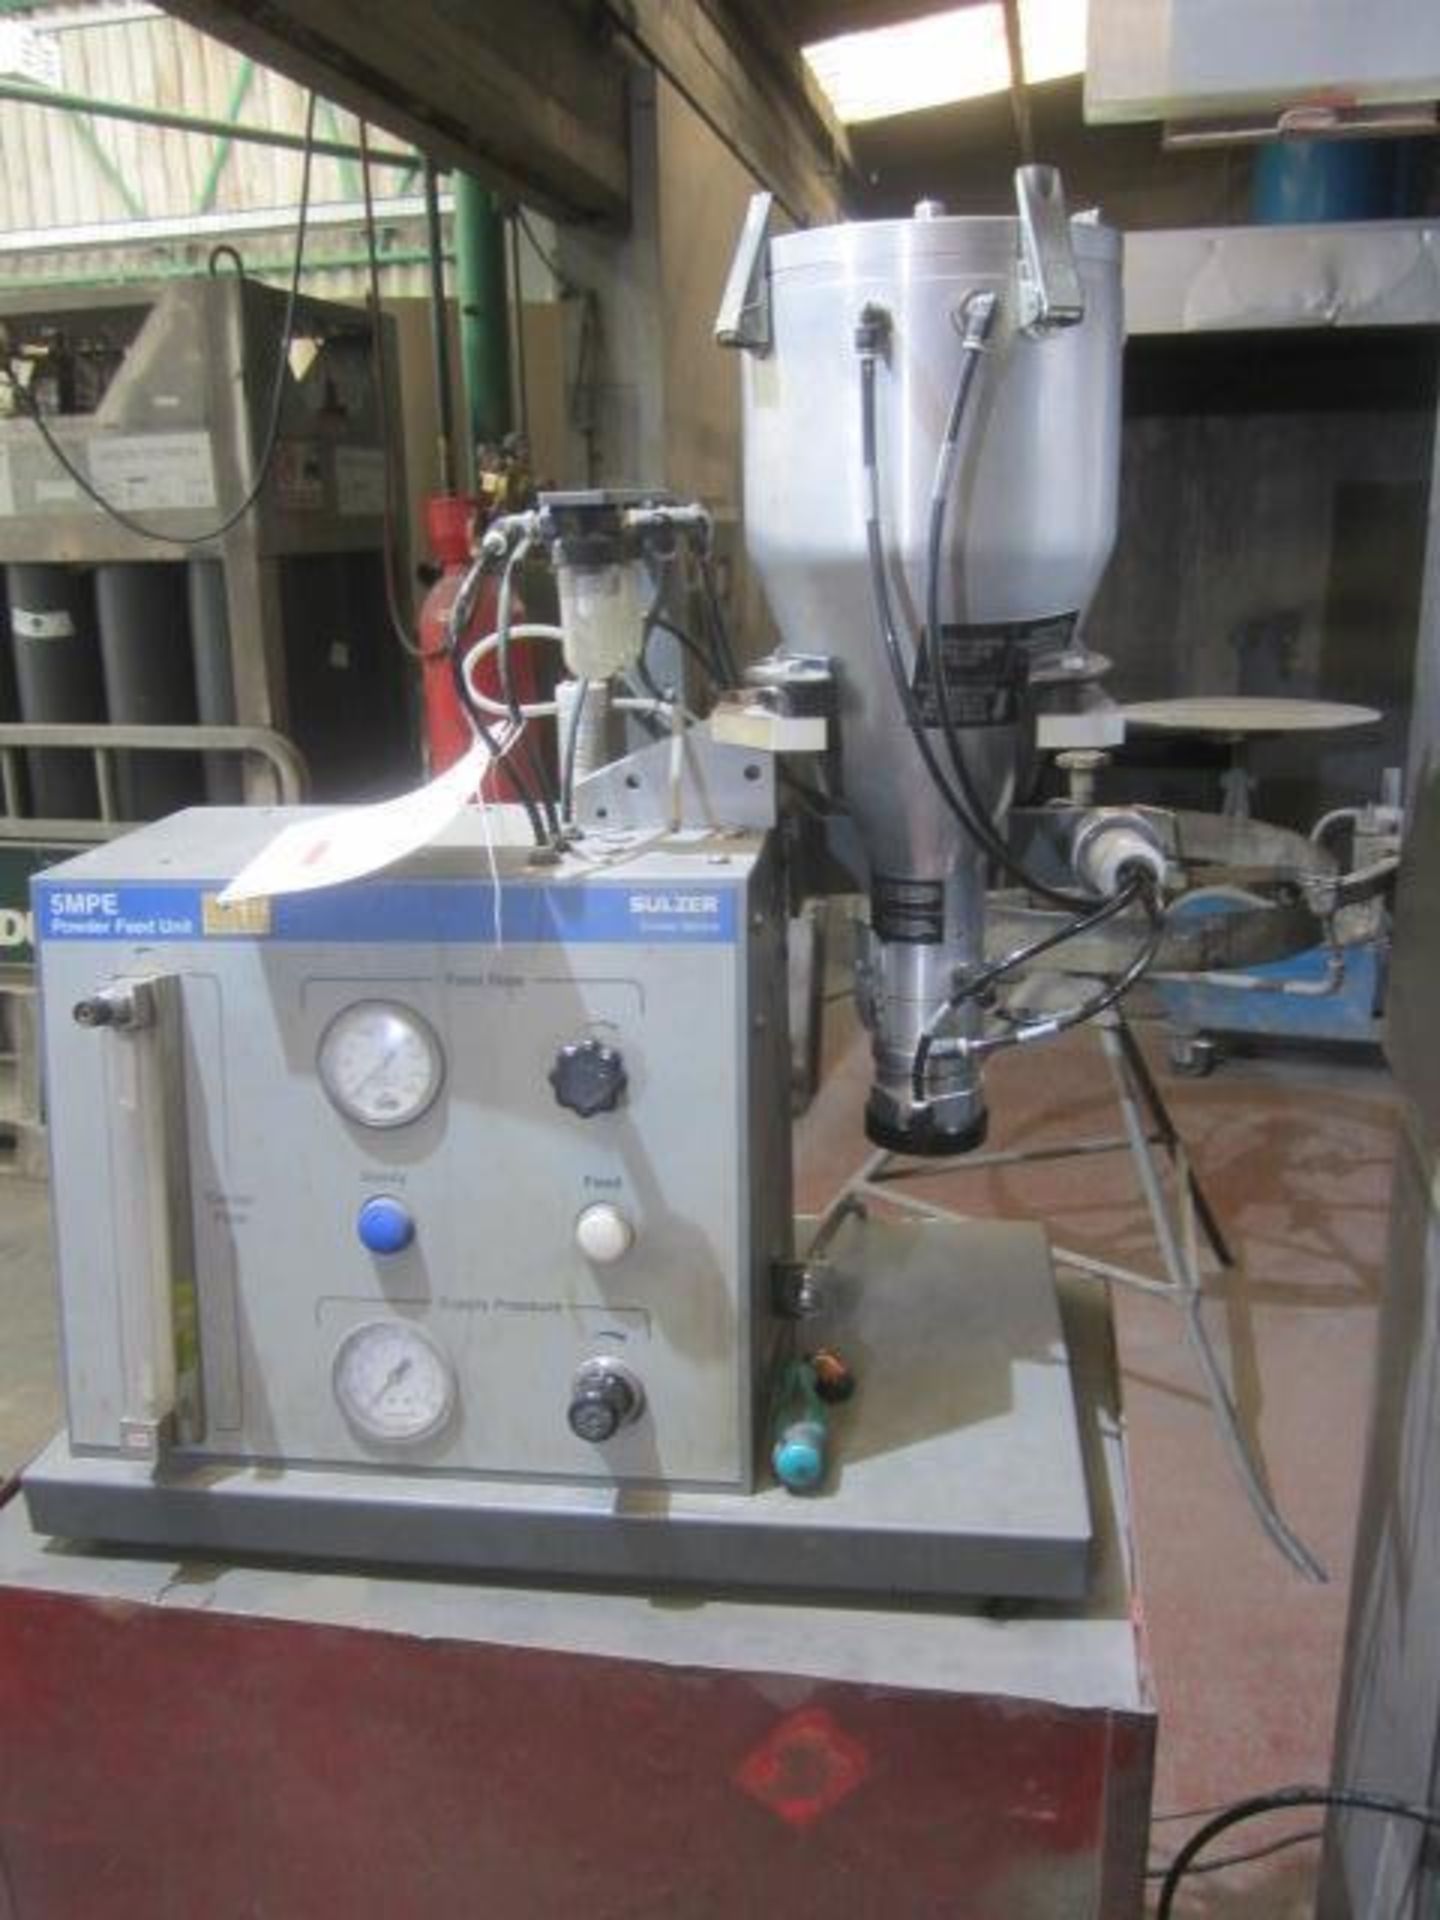 Sulzer Metco 5MPE powder feed unit, serial no. D5MPE111227-2 (2012) Please note: Acceptance of the